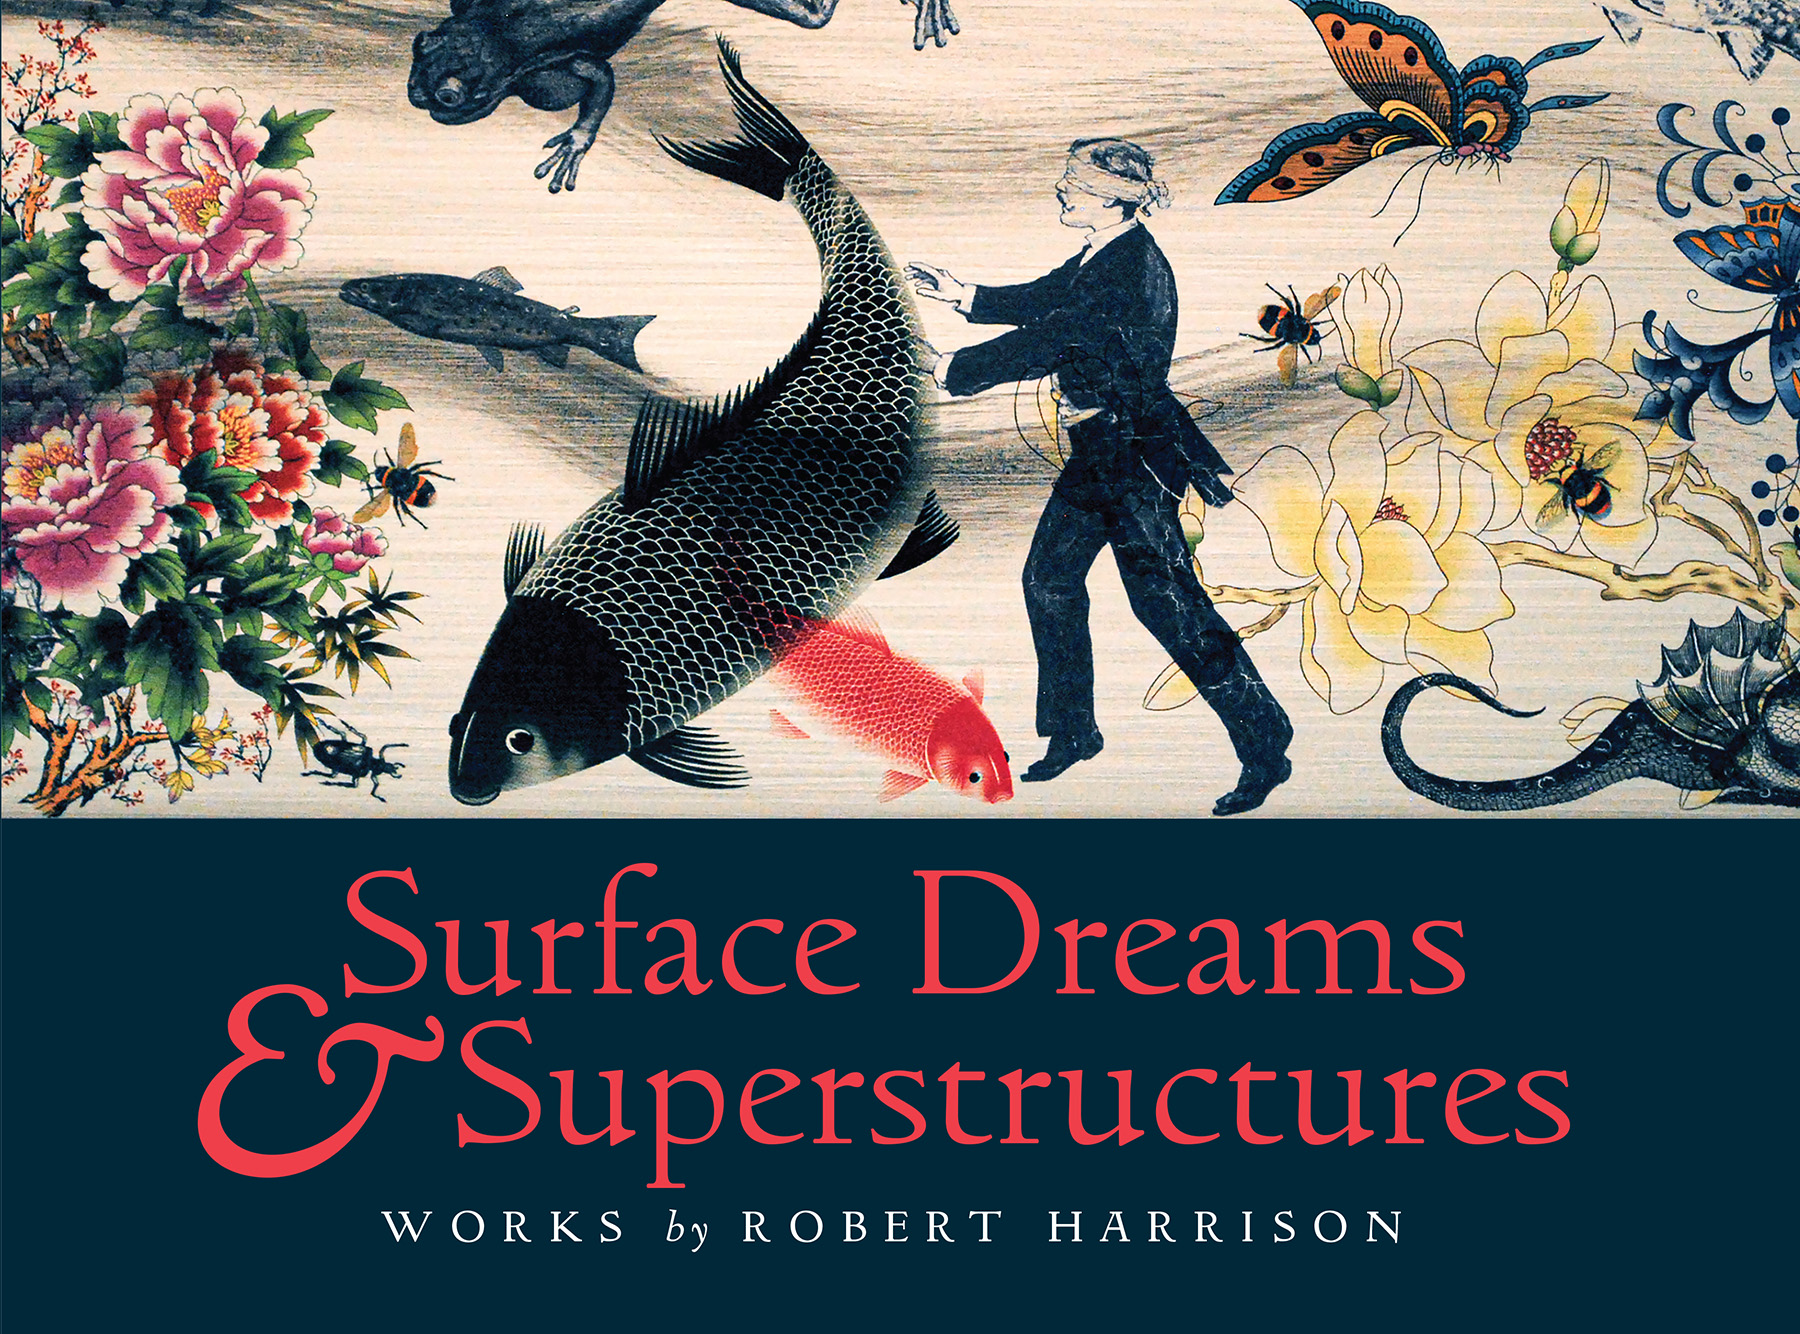 Cover of Robert Harrison's "Surface Dreams & Superstructures" catalogue, featuring artwork from the show.